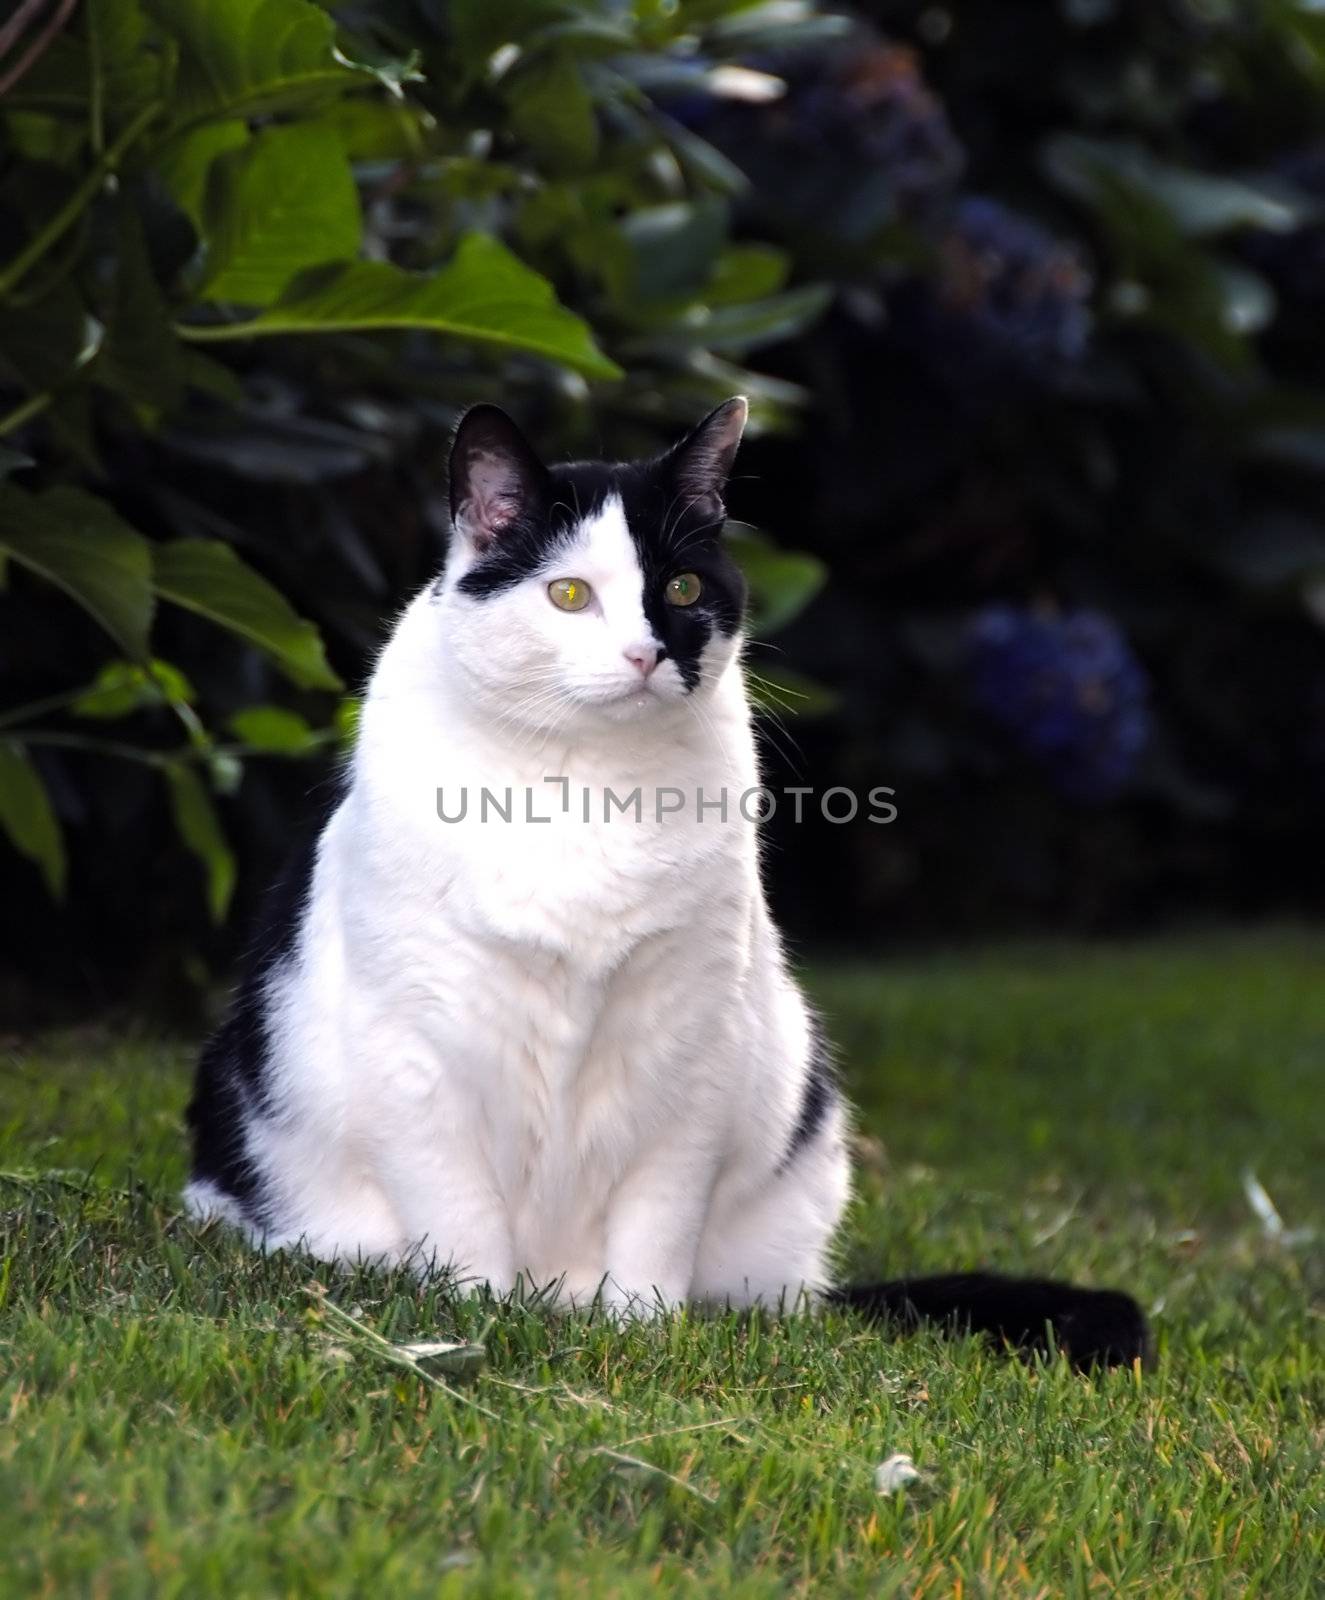 An adorable black and white pet cat sitting in the lawn